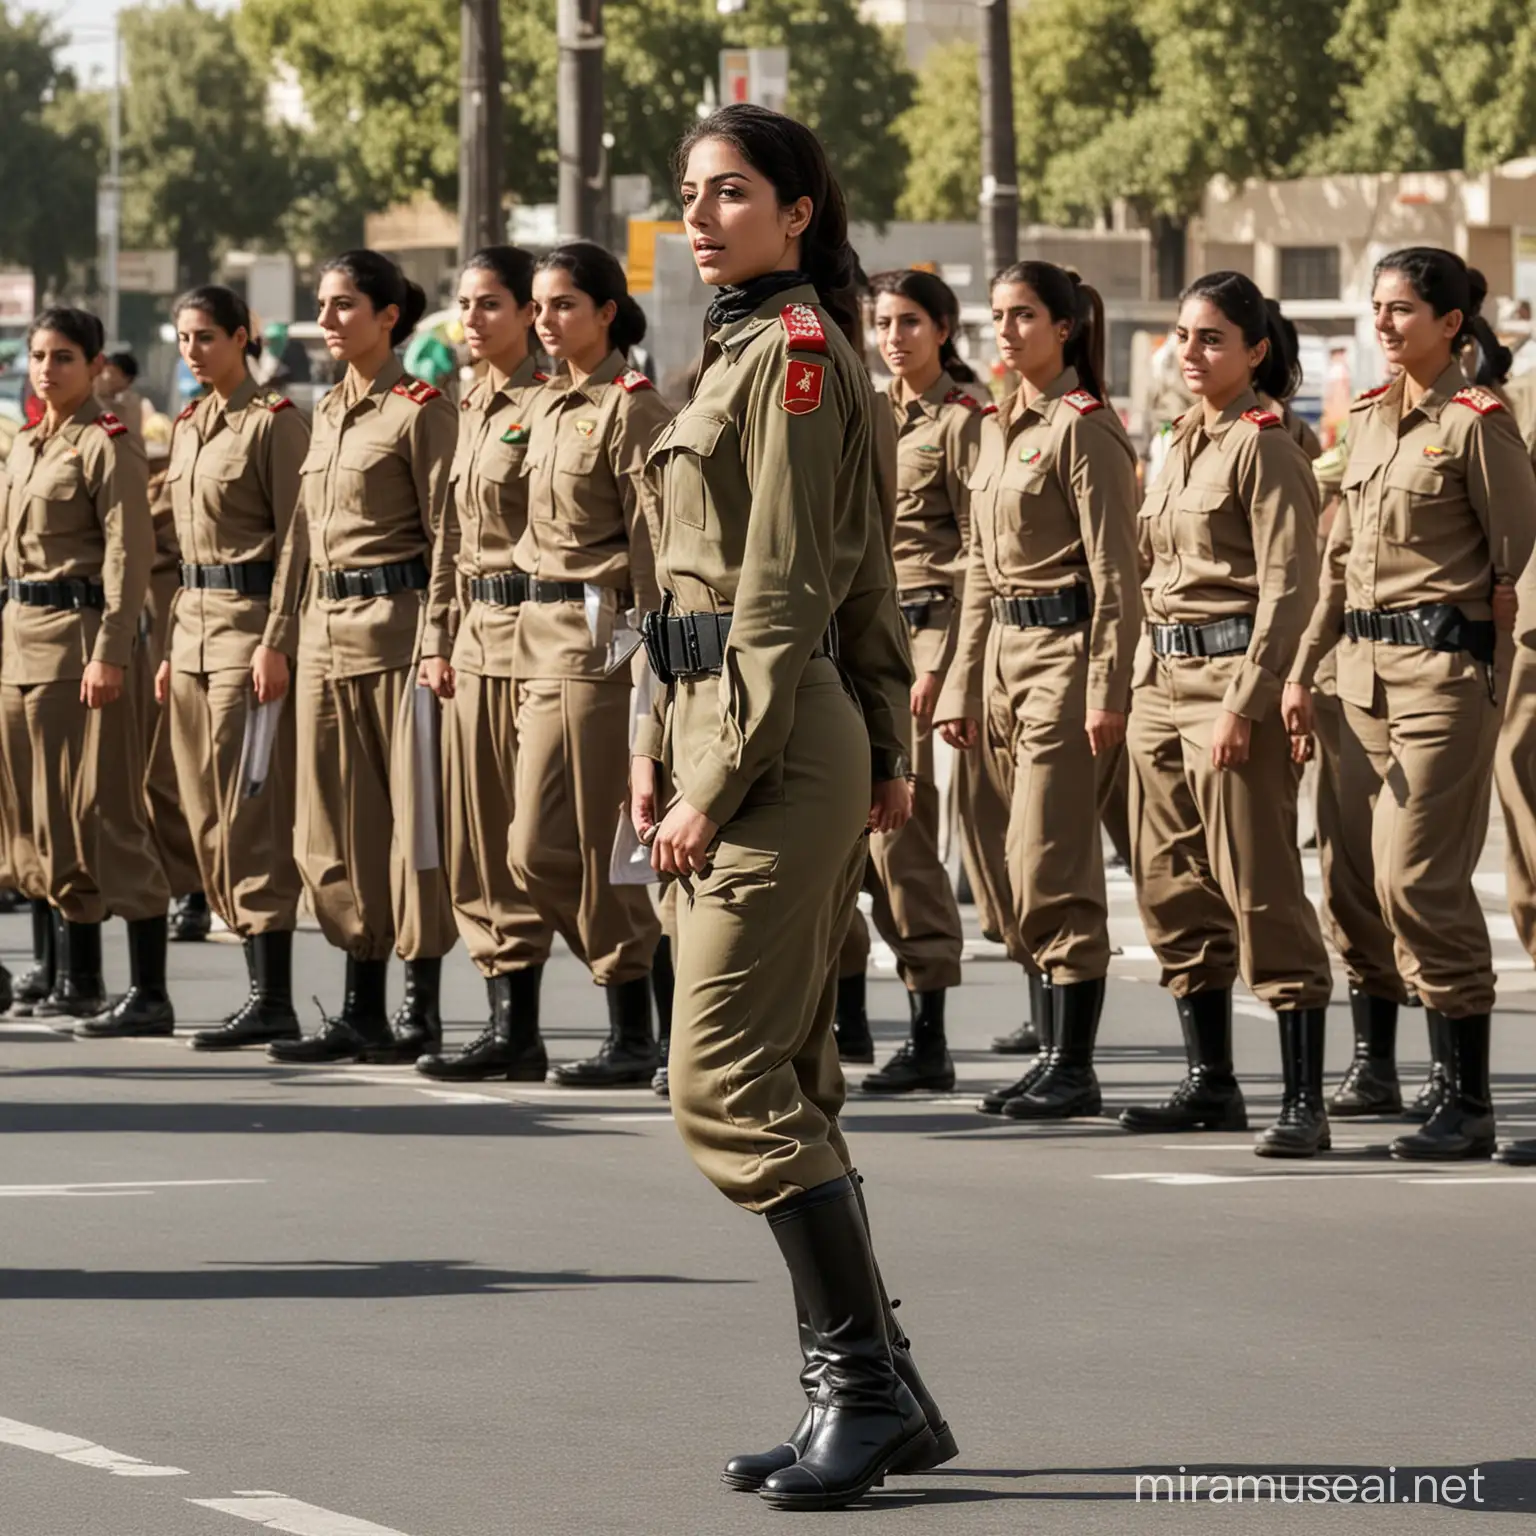 Iranian female soldier with big ass marching in tehran